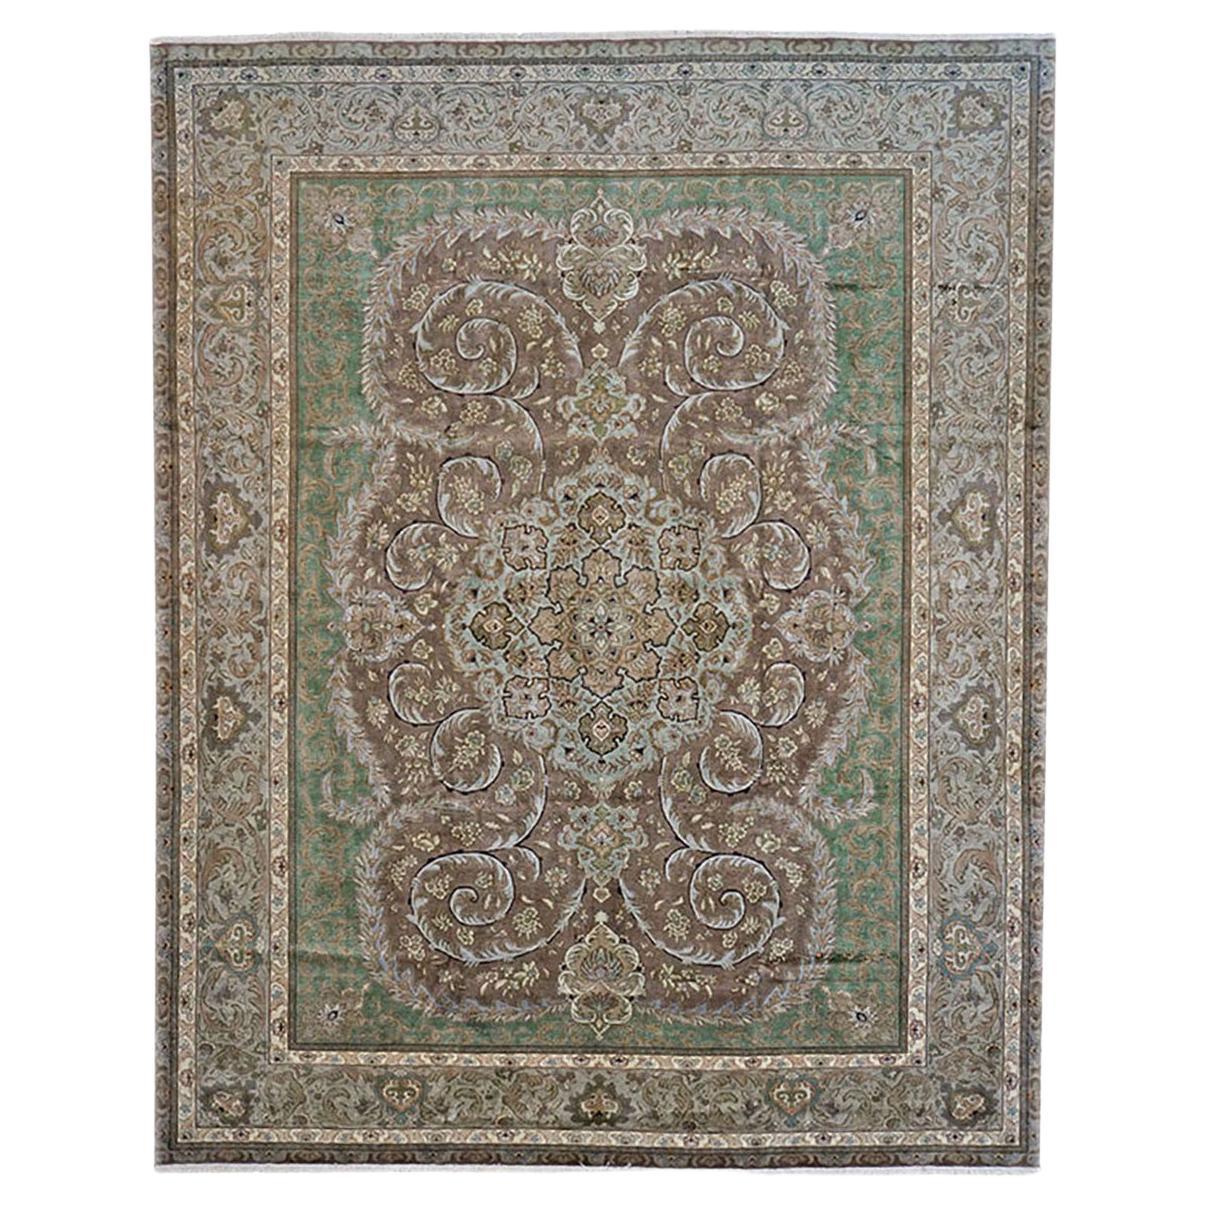 Antique Persian Tabriz 9x12 Green, Brown, & Taupe Handmade Area Rug